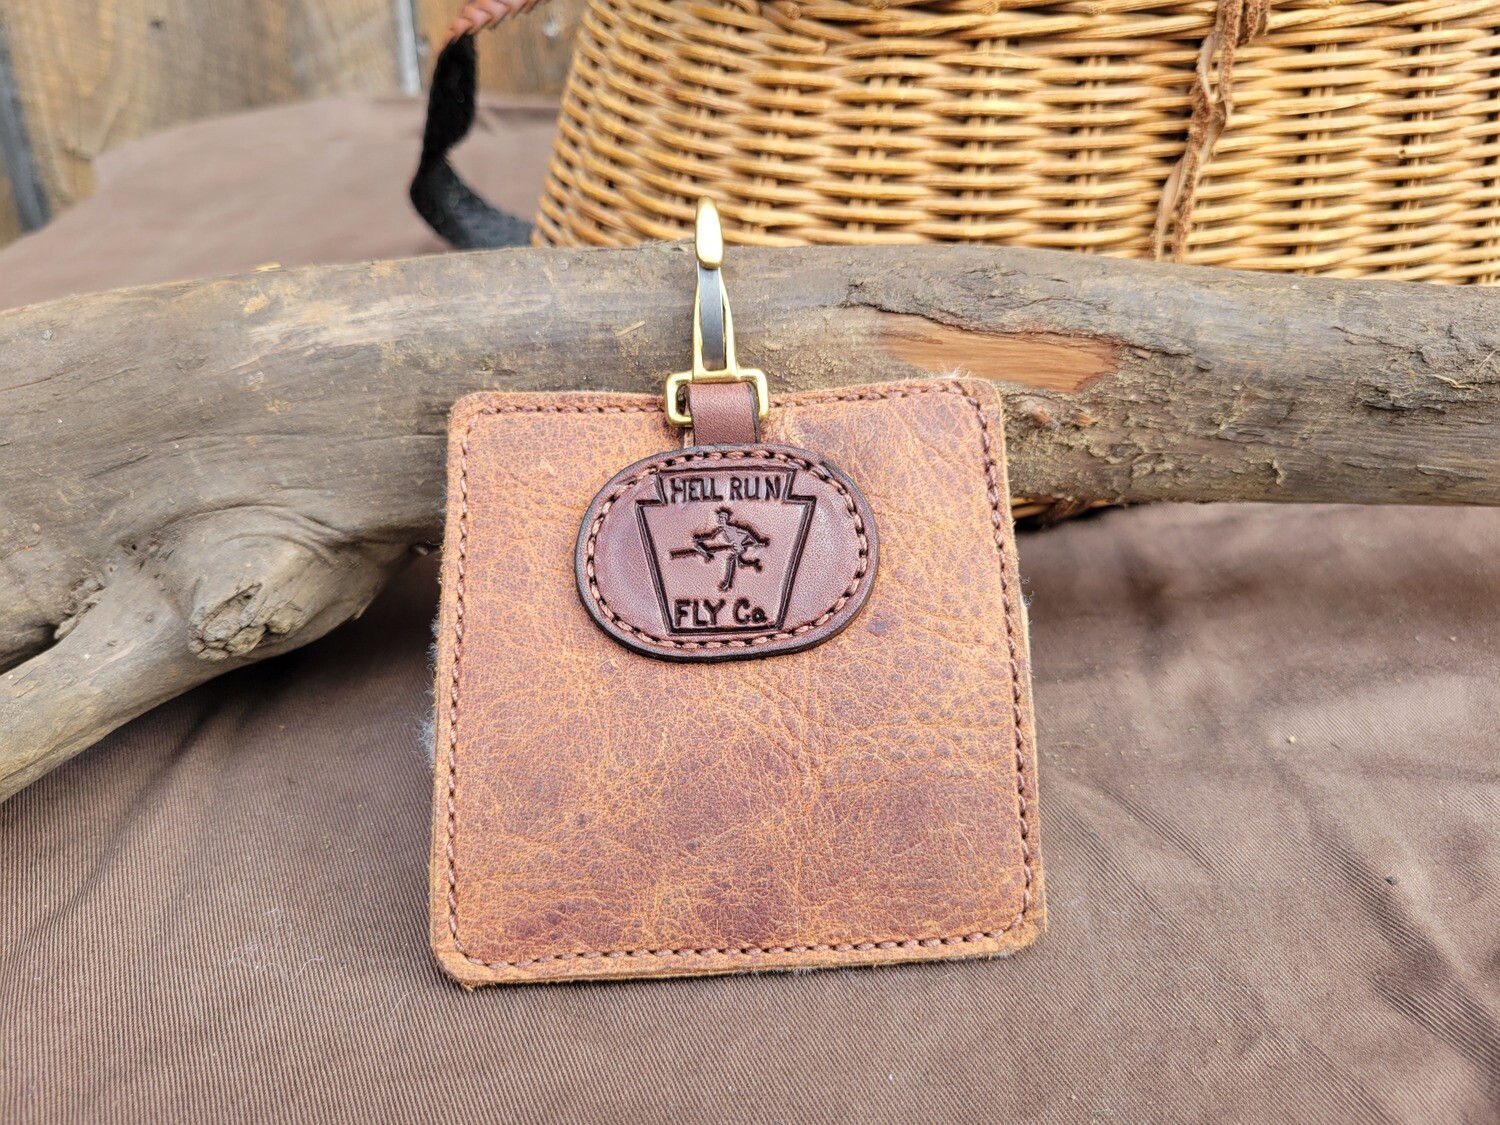 Hell Run Square Fly Patch